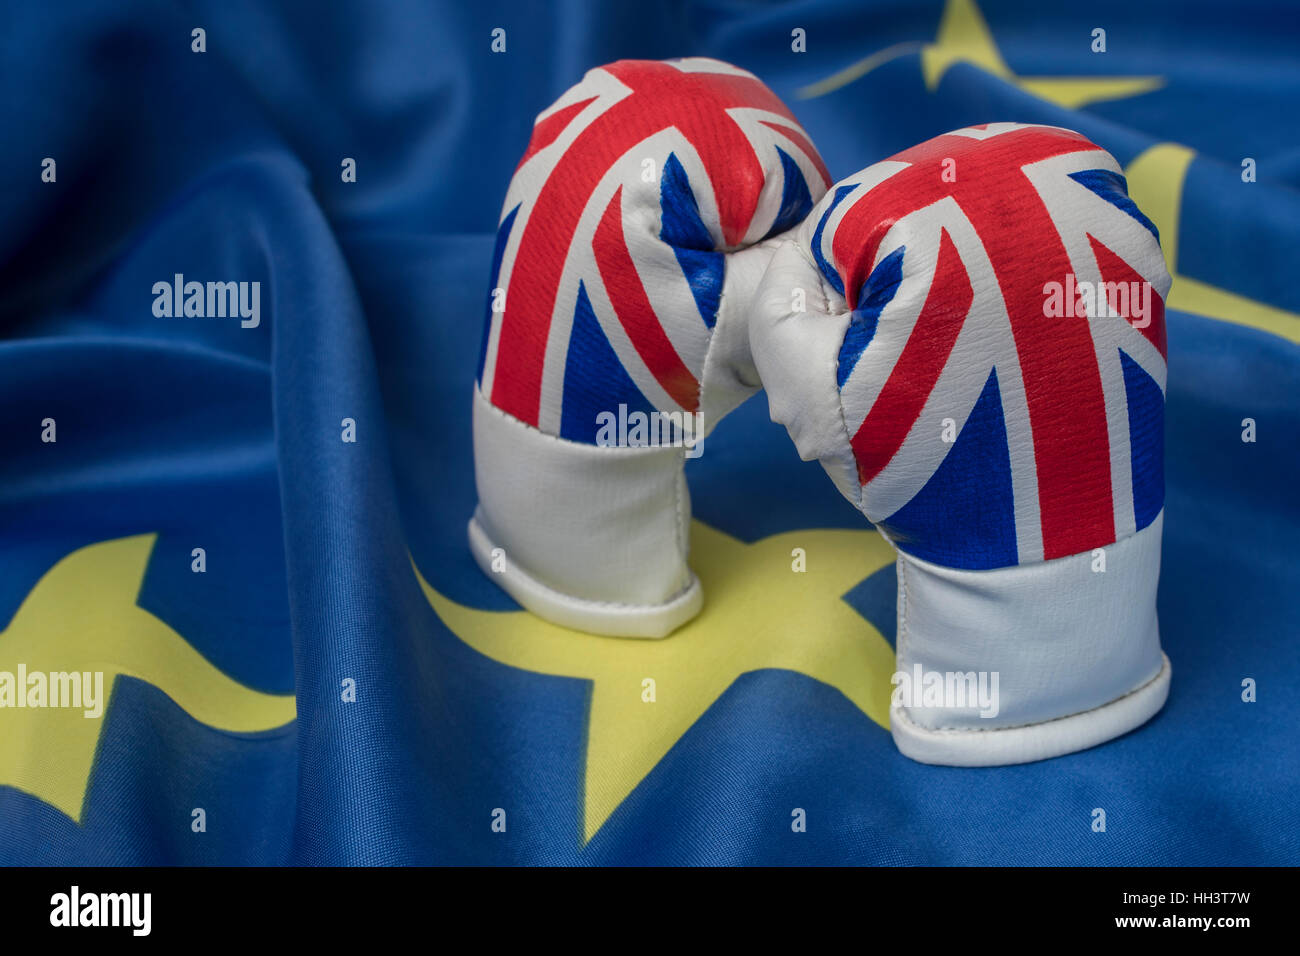 Union Jack boxing gloves blue background & yellow stars (like EU flag). Concept UK trade / Brexit negotiations,  EU UK relationship, gloves are off Stock Photo